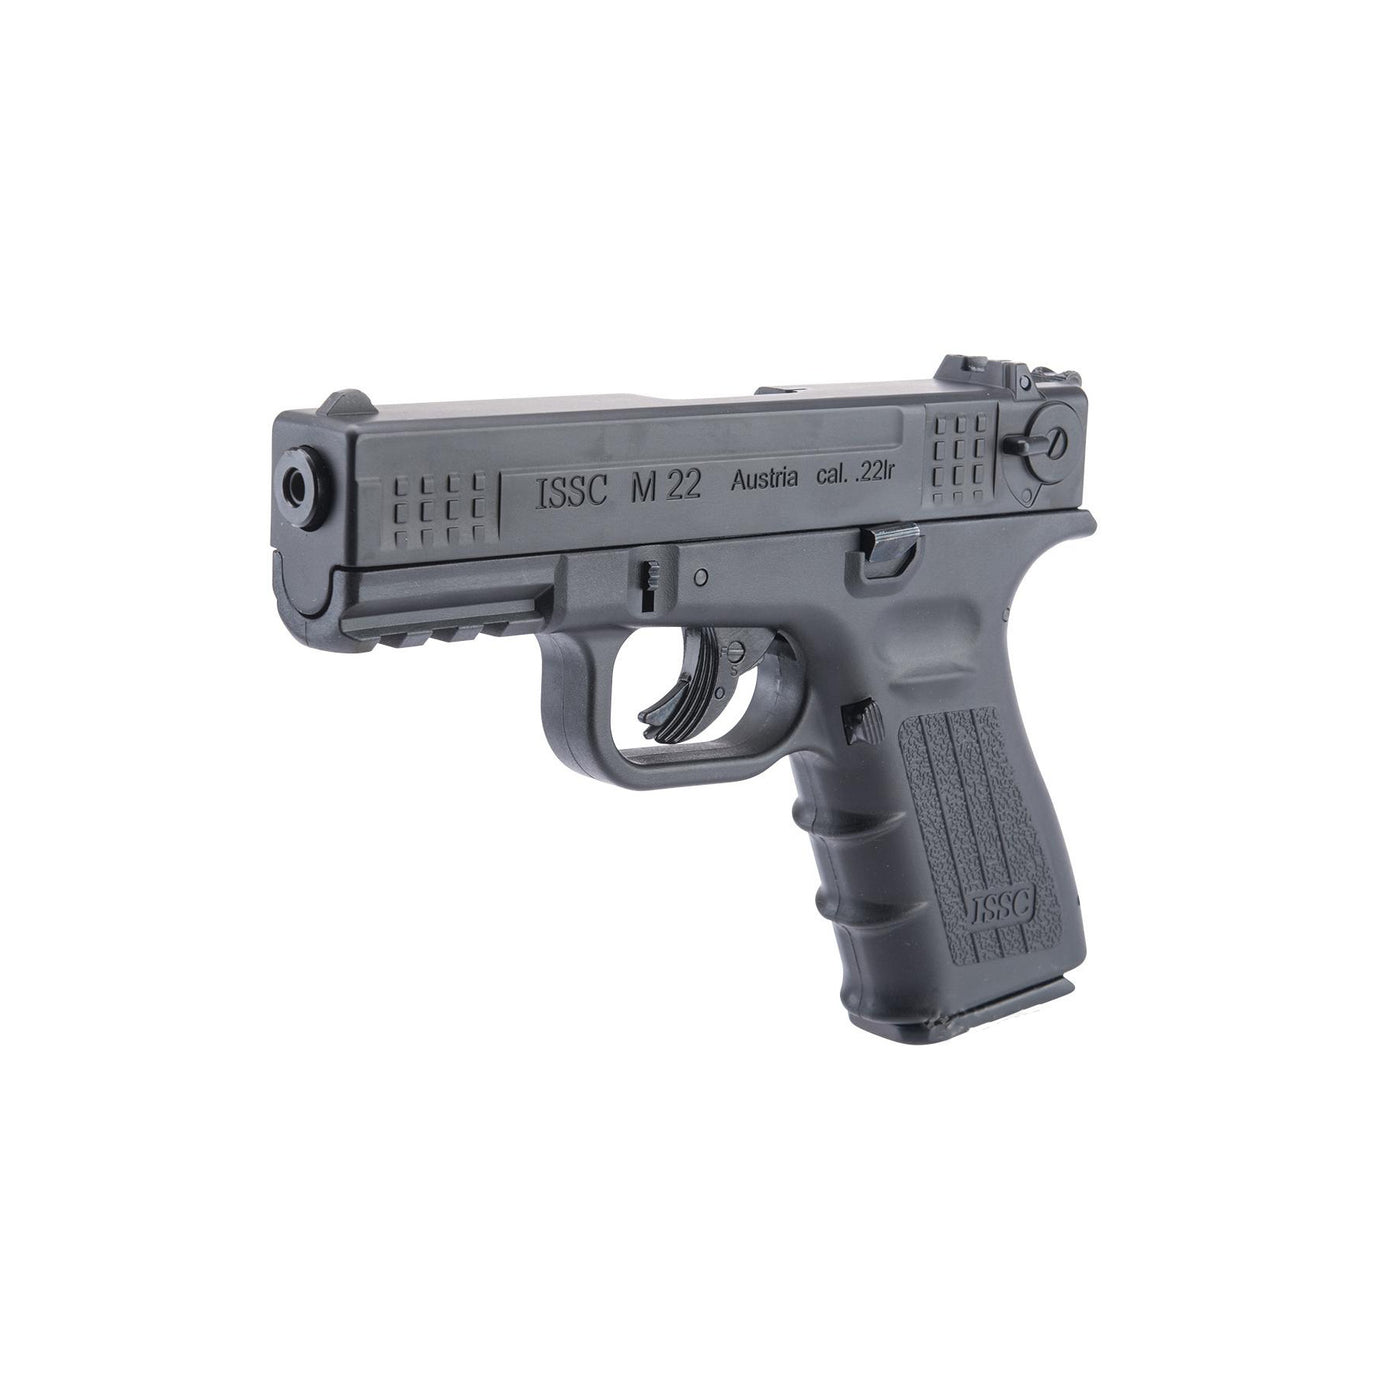 Pistola CO2 ISSC M22 365 fps cal 4.5mm retroceso ASG